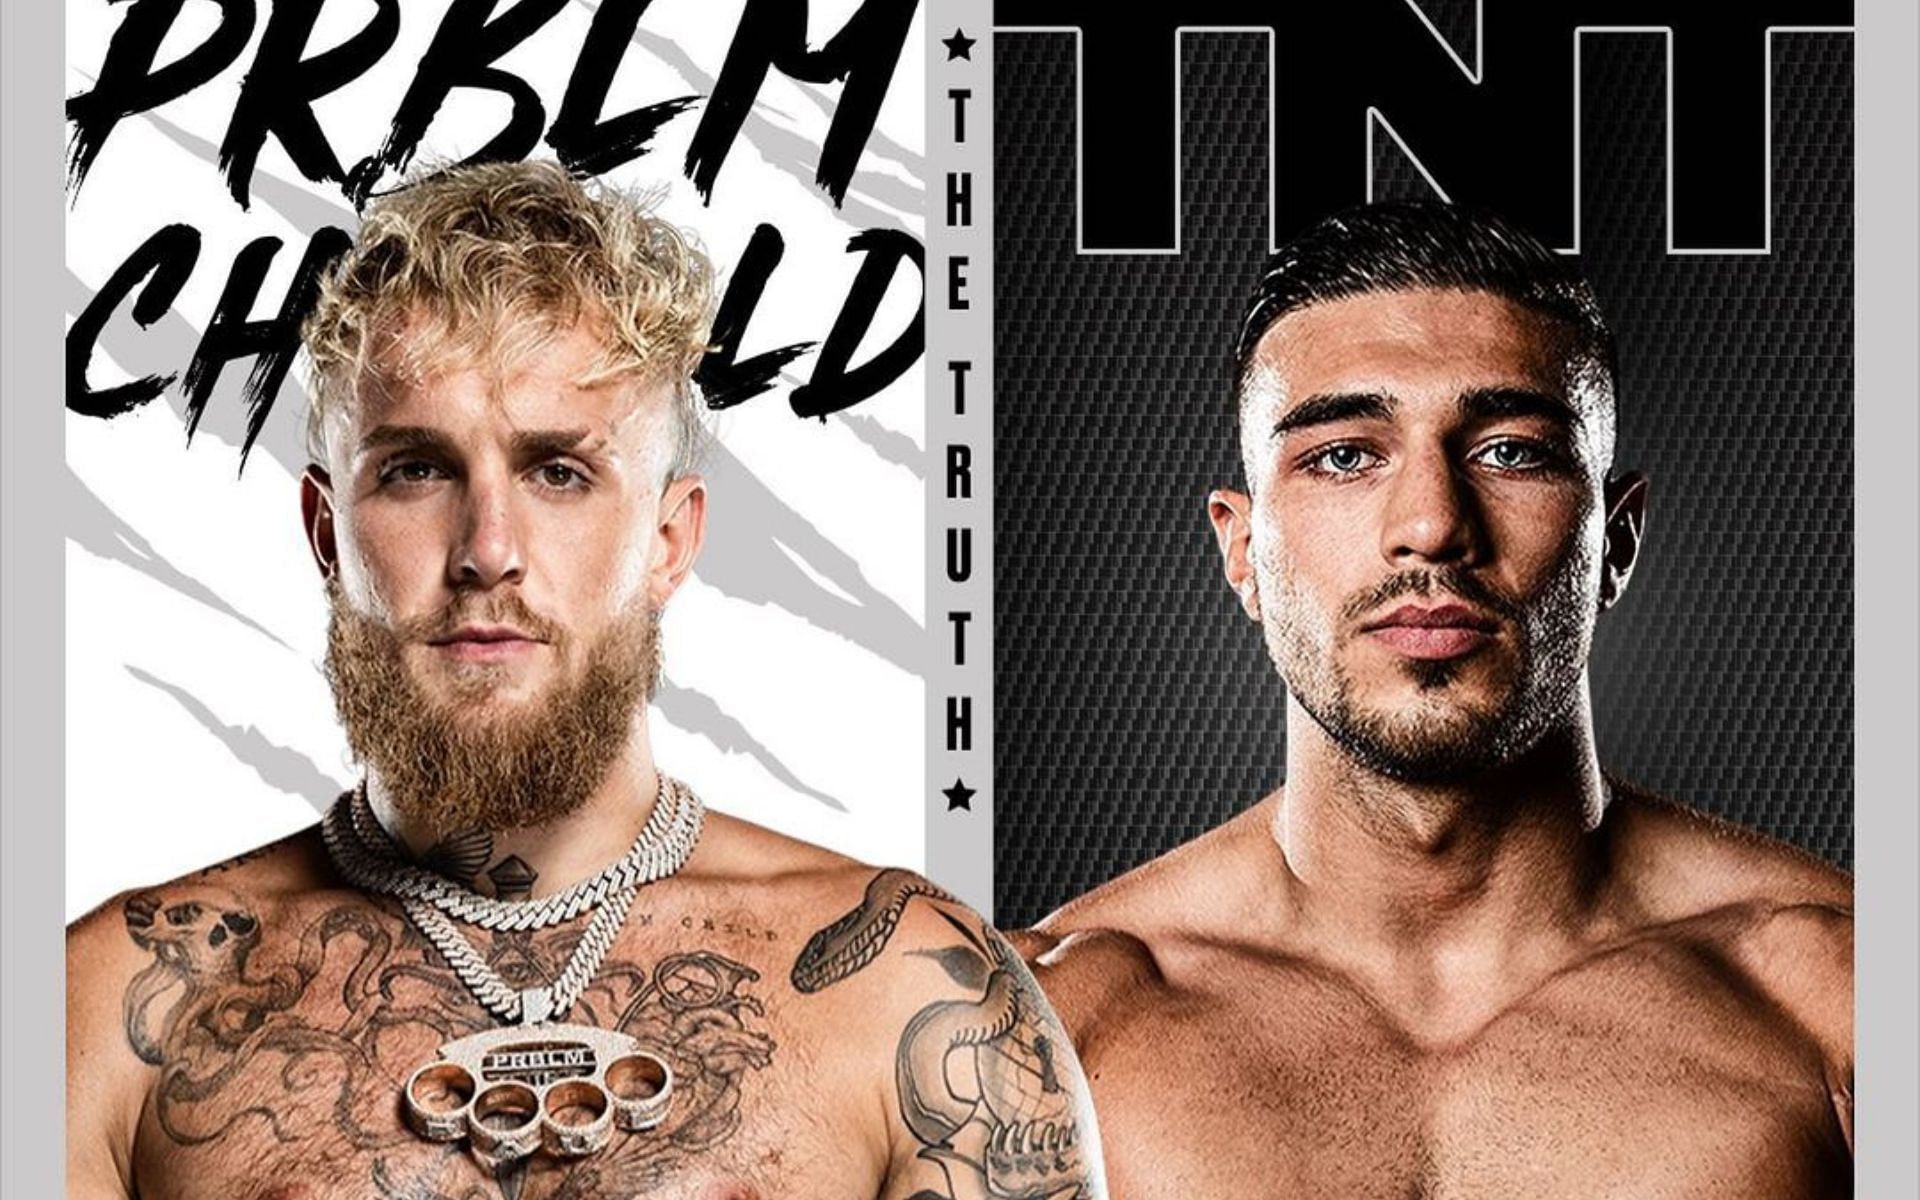 How to watch Jake Paul vs Tommy Fury? Here are the streaming details for the US, UK, Canada and Australia